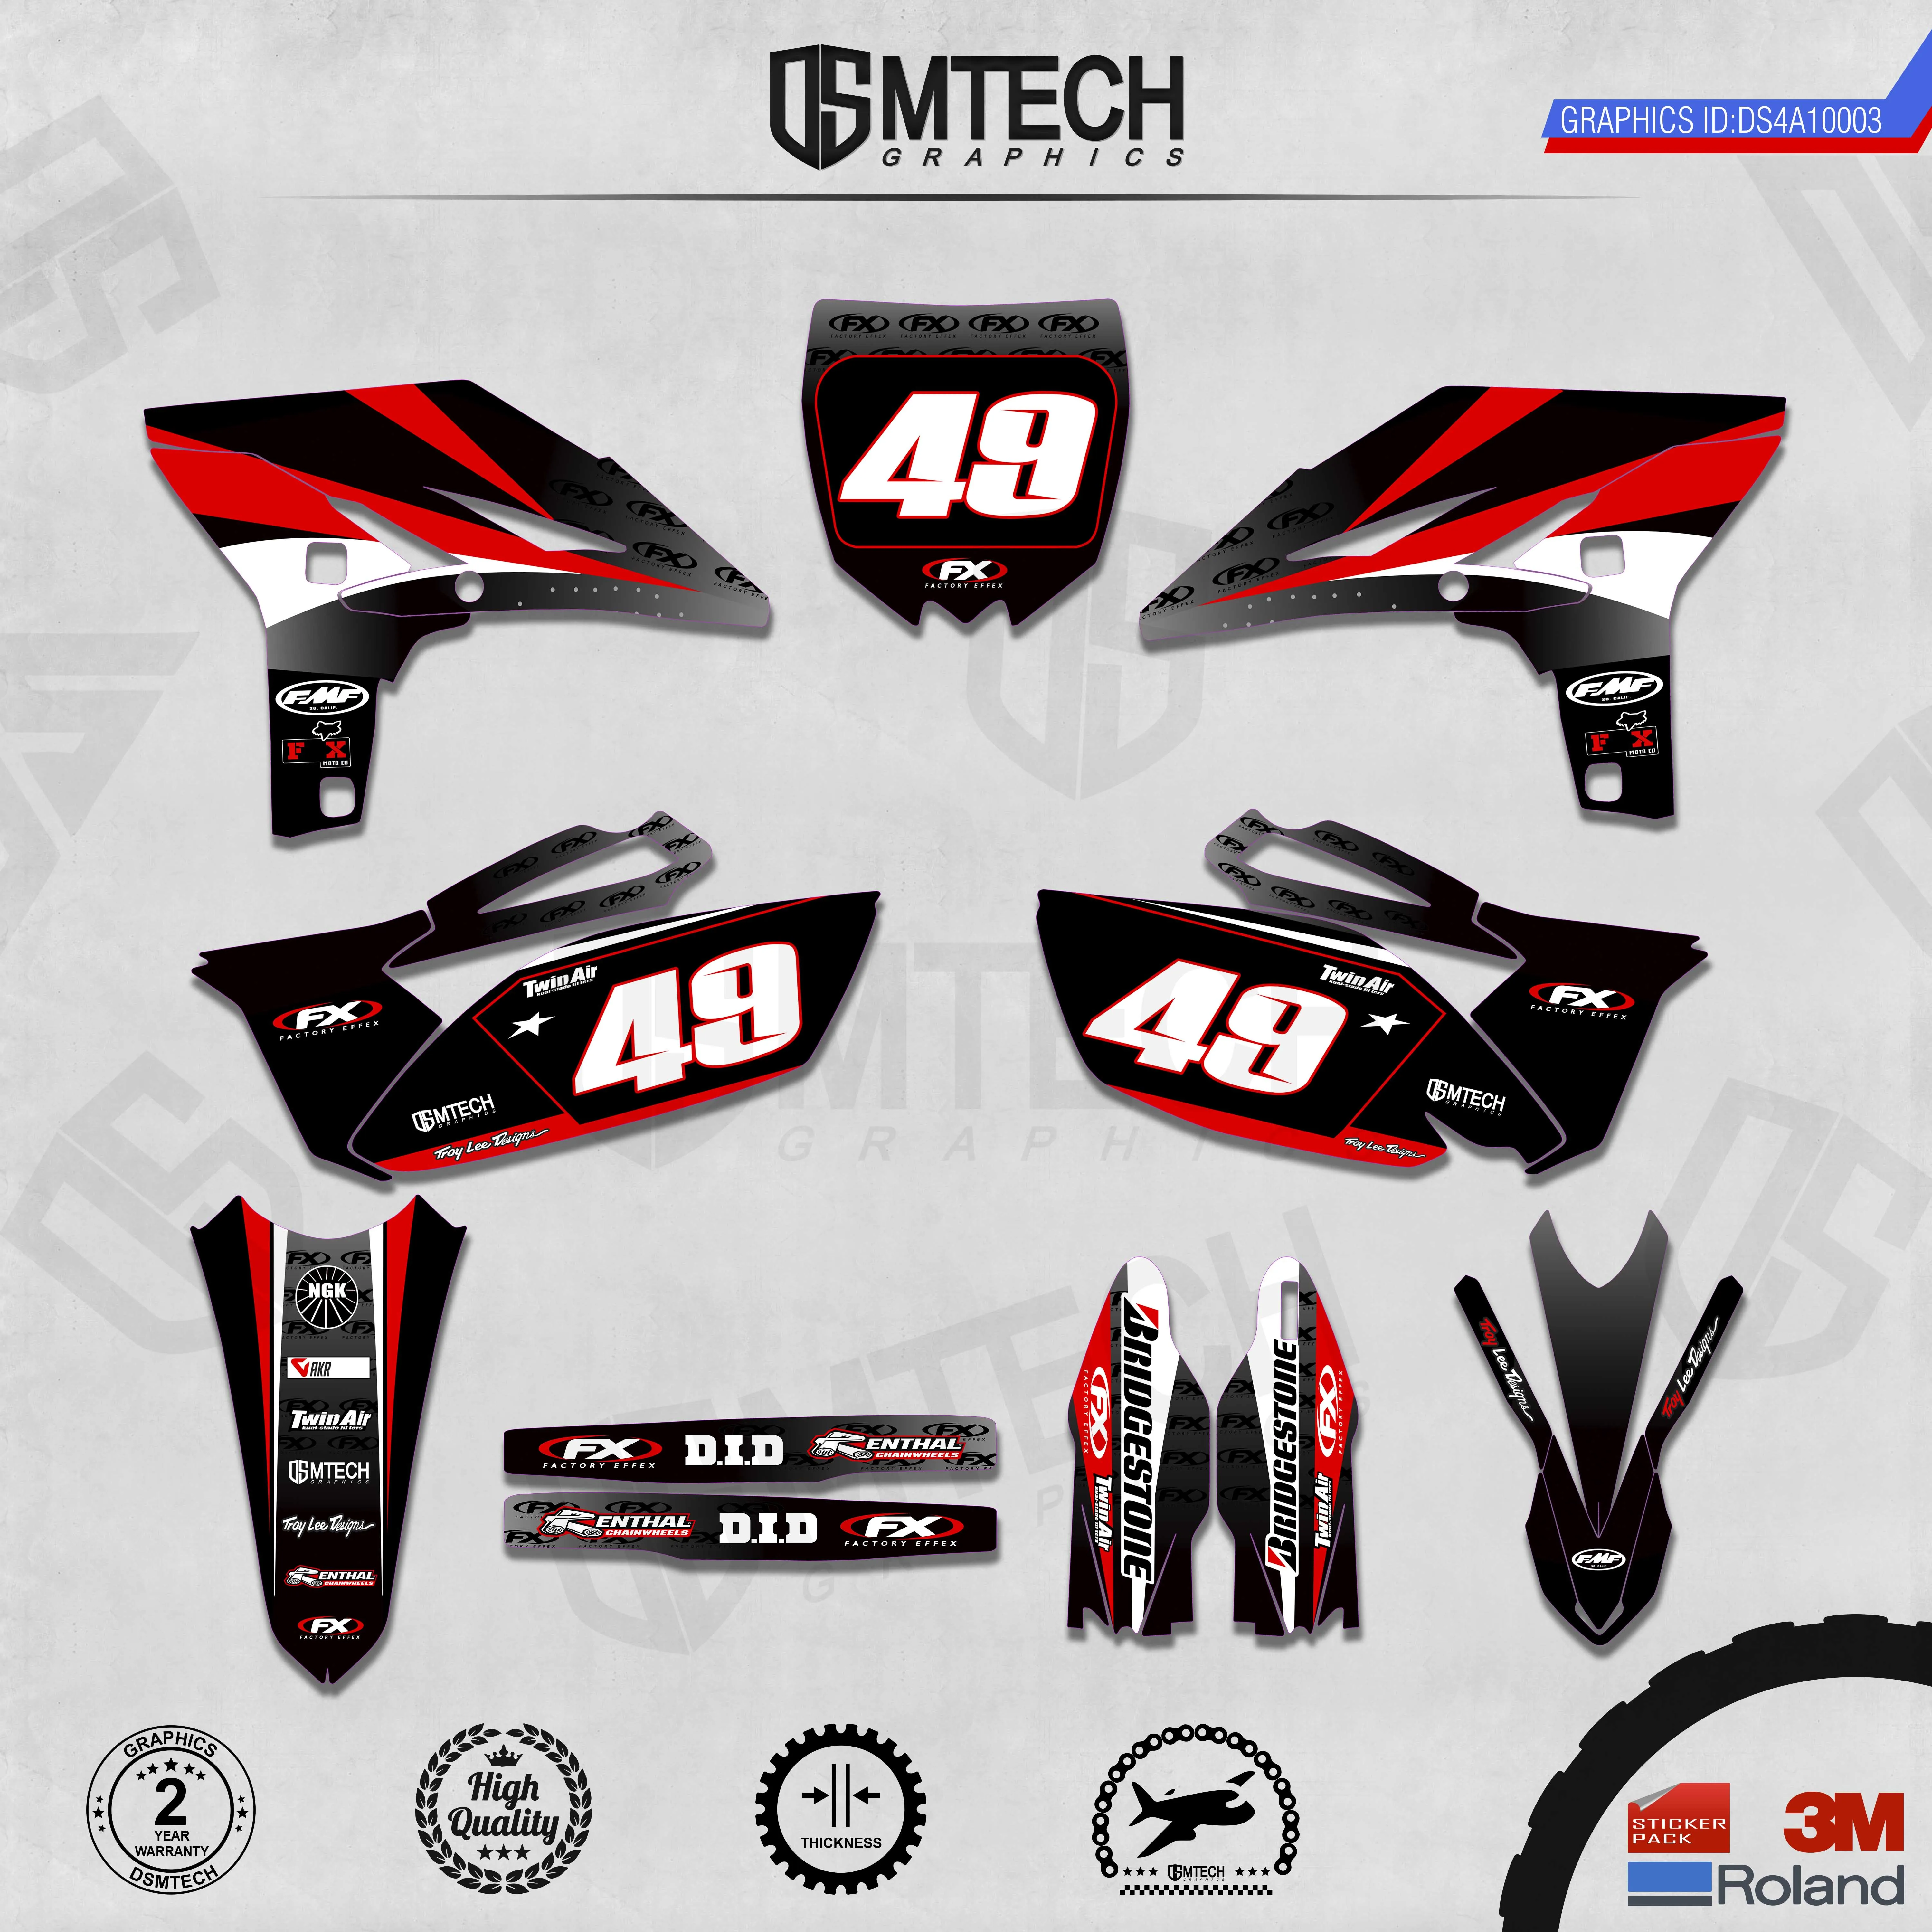 DSMTECH Customized Team Graphics Backgrounds Decals 3M Custom Stickers For  YZF250 Two Stroke 2010-2013  003